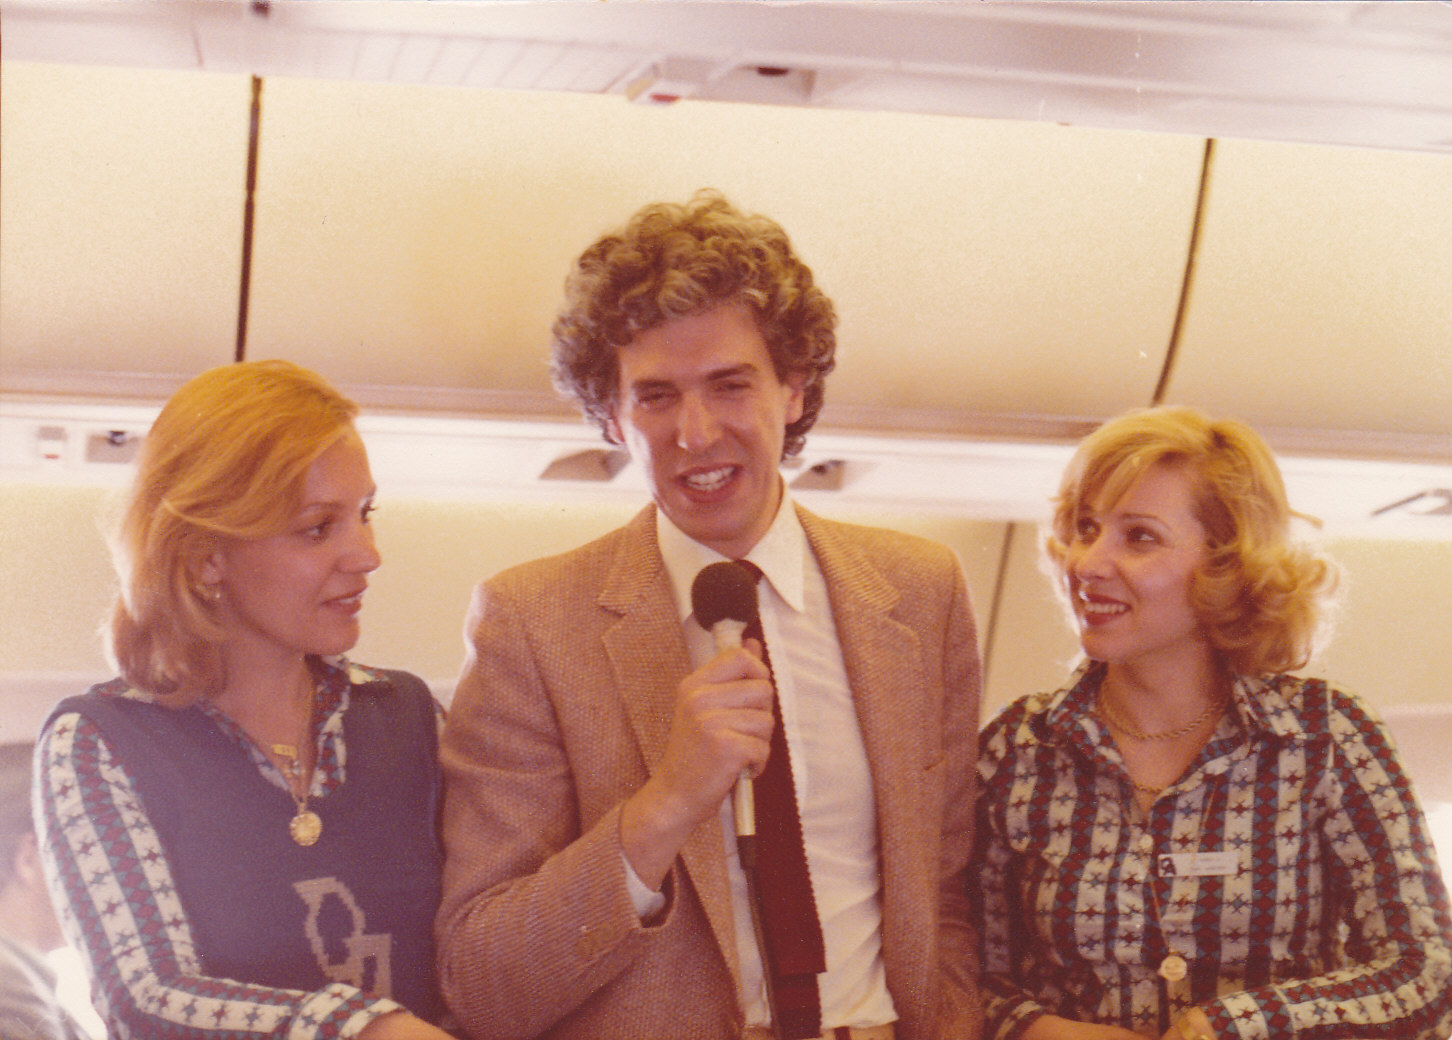 Presenting his first TV production, sponsored by OLYMPIC AIRWAYS. 1978